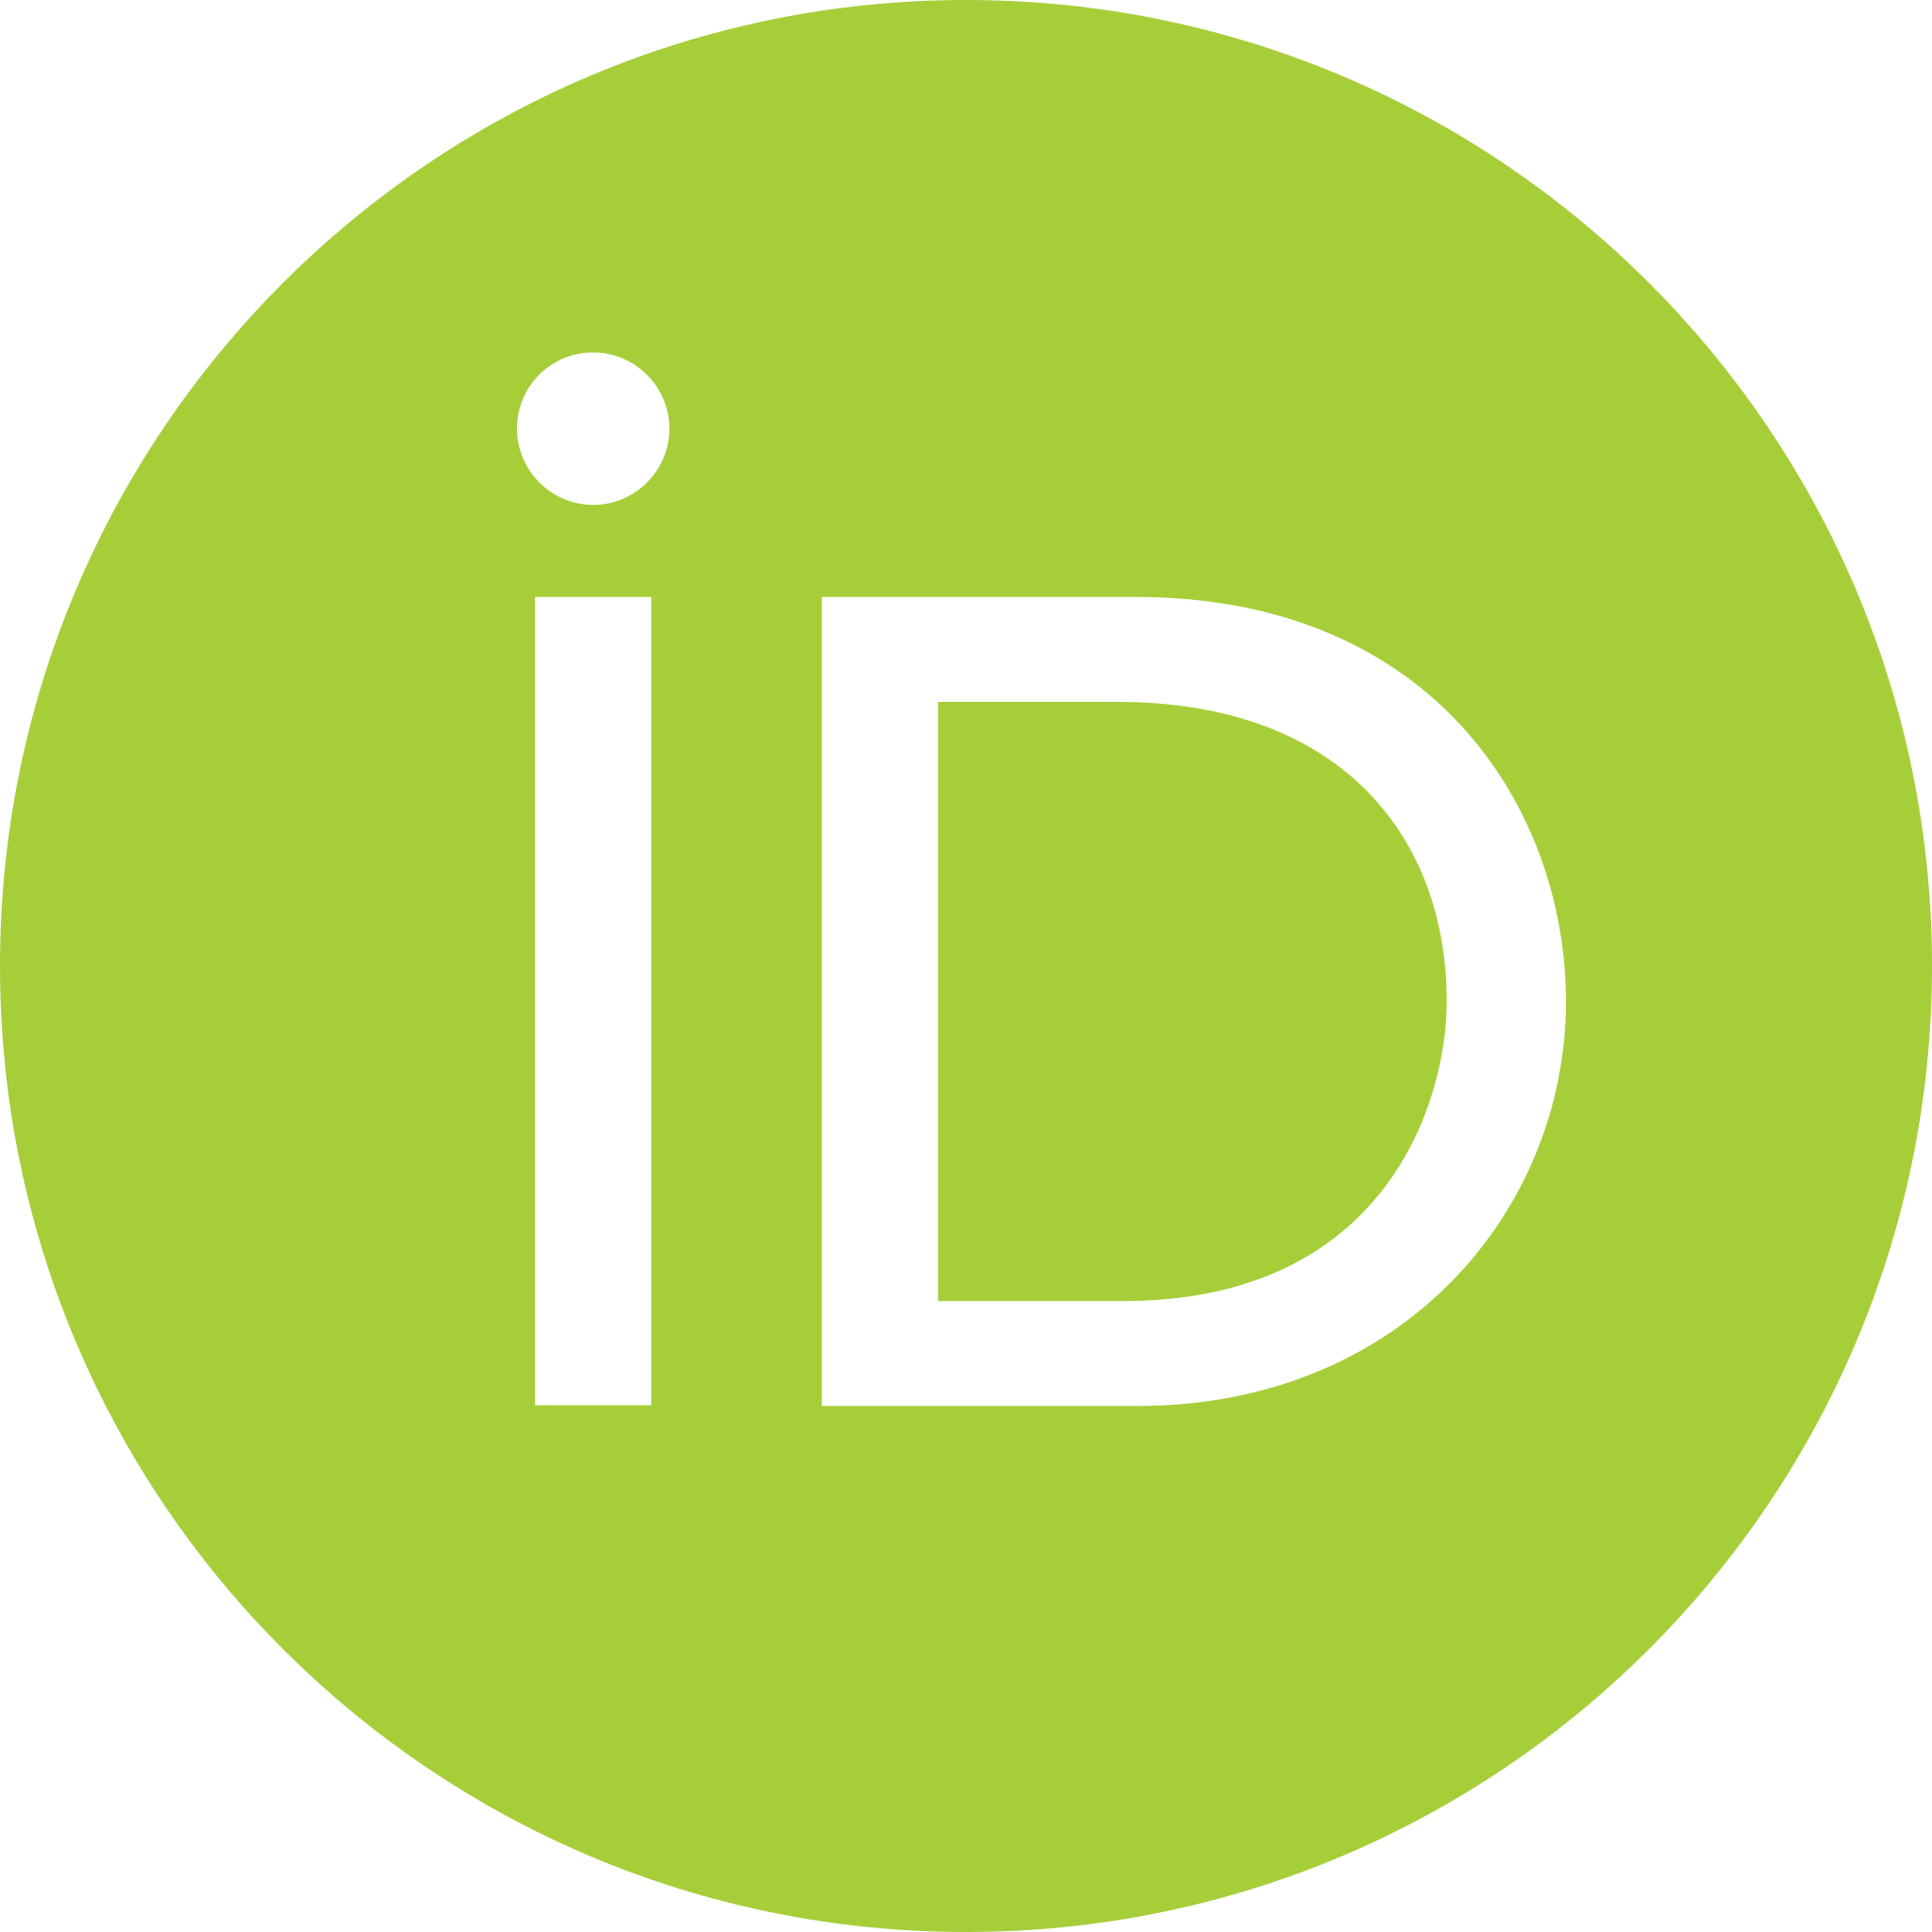 orcid-id